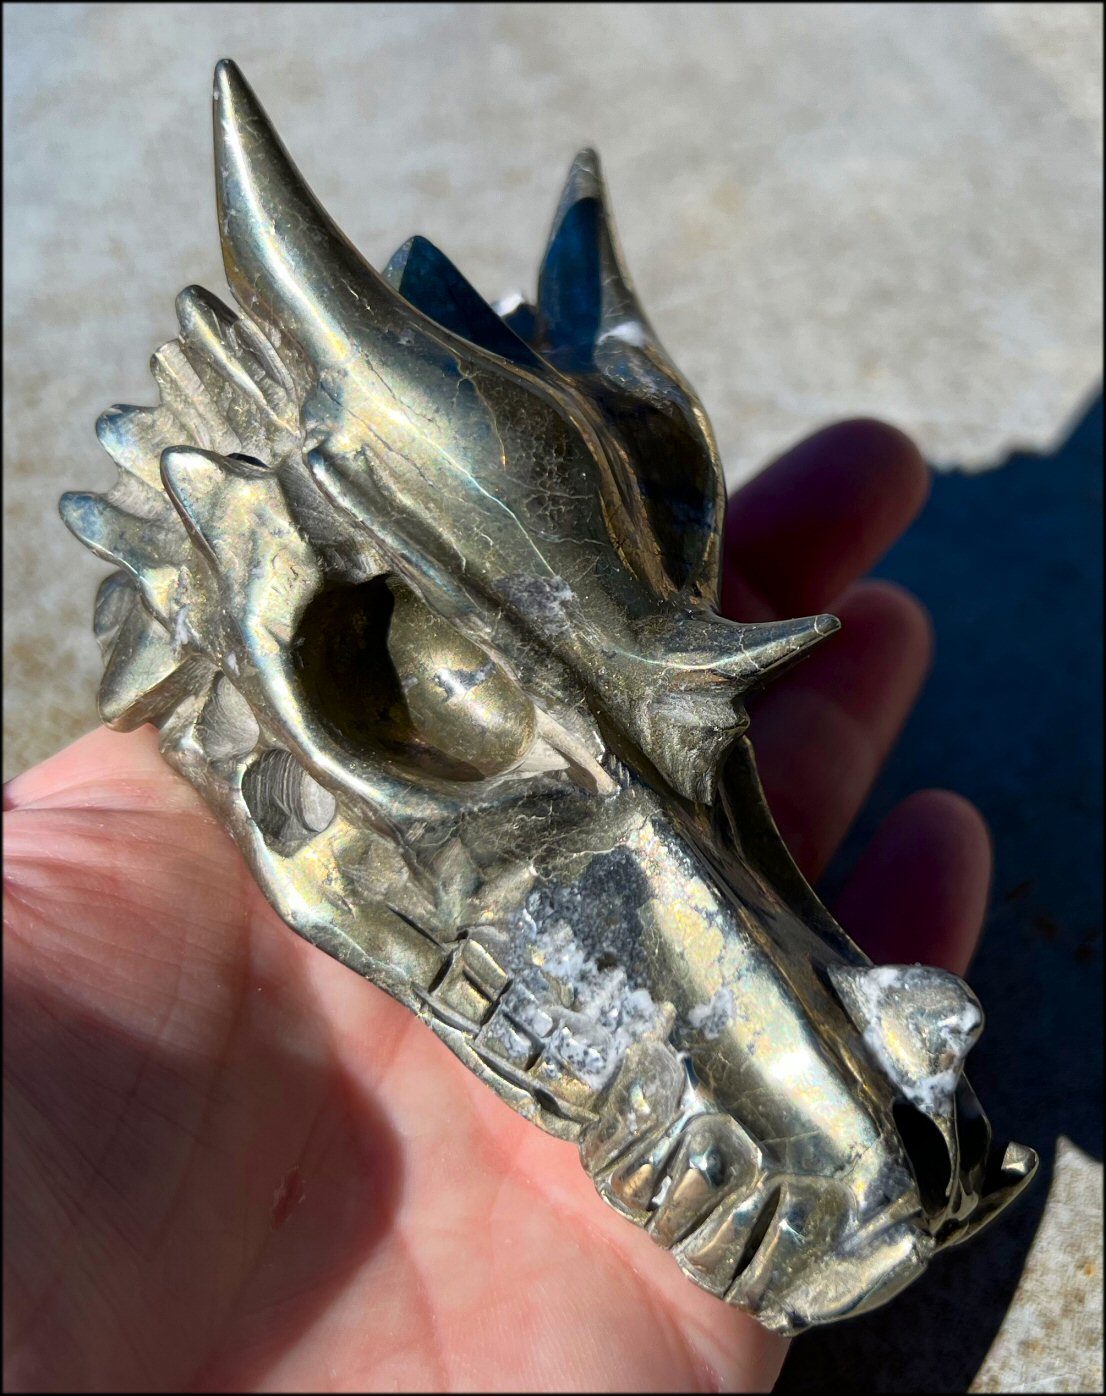 Lg. Pyrite DRAGON Crystal Skull with Quartz inclusions - Intellect, Mental Clarity